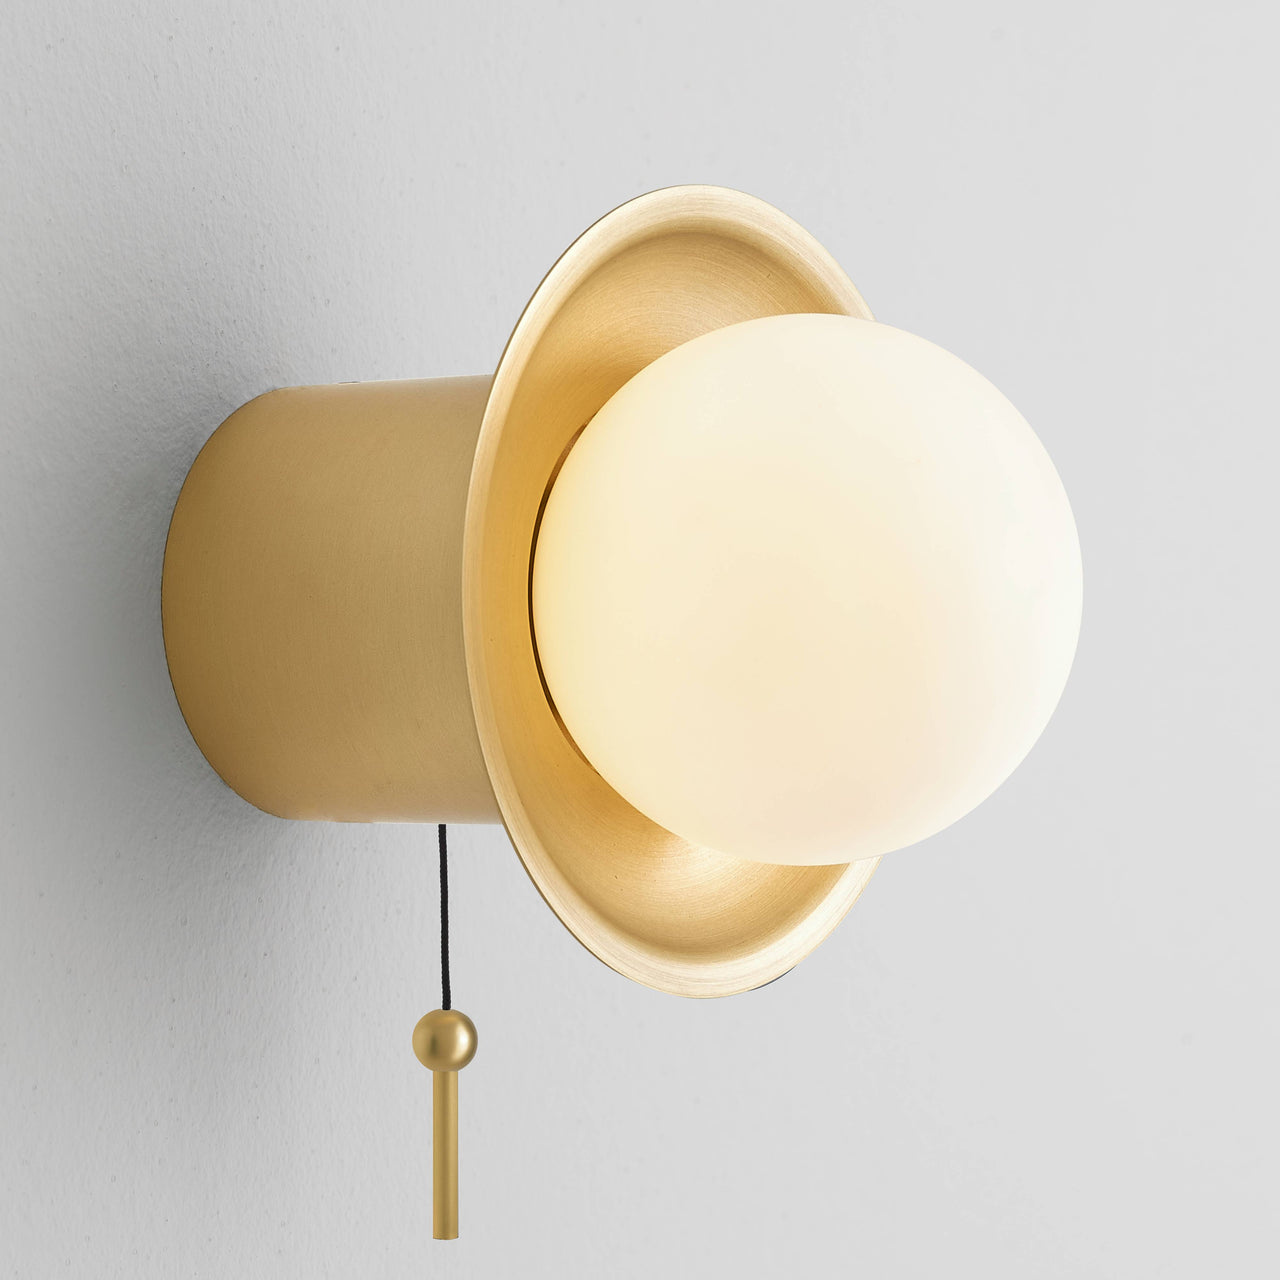 Janed Wall Light with Cord